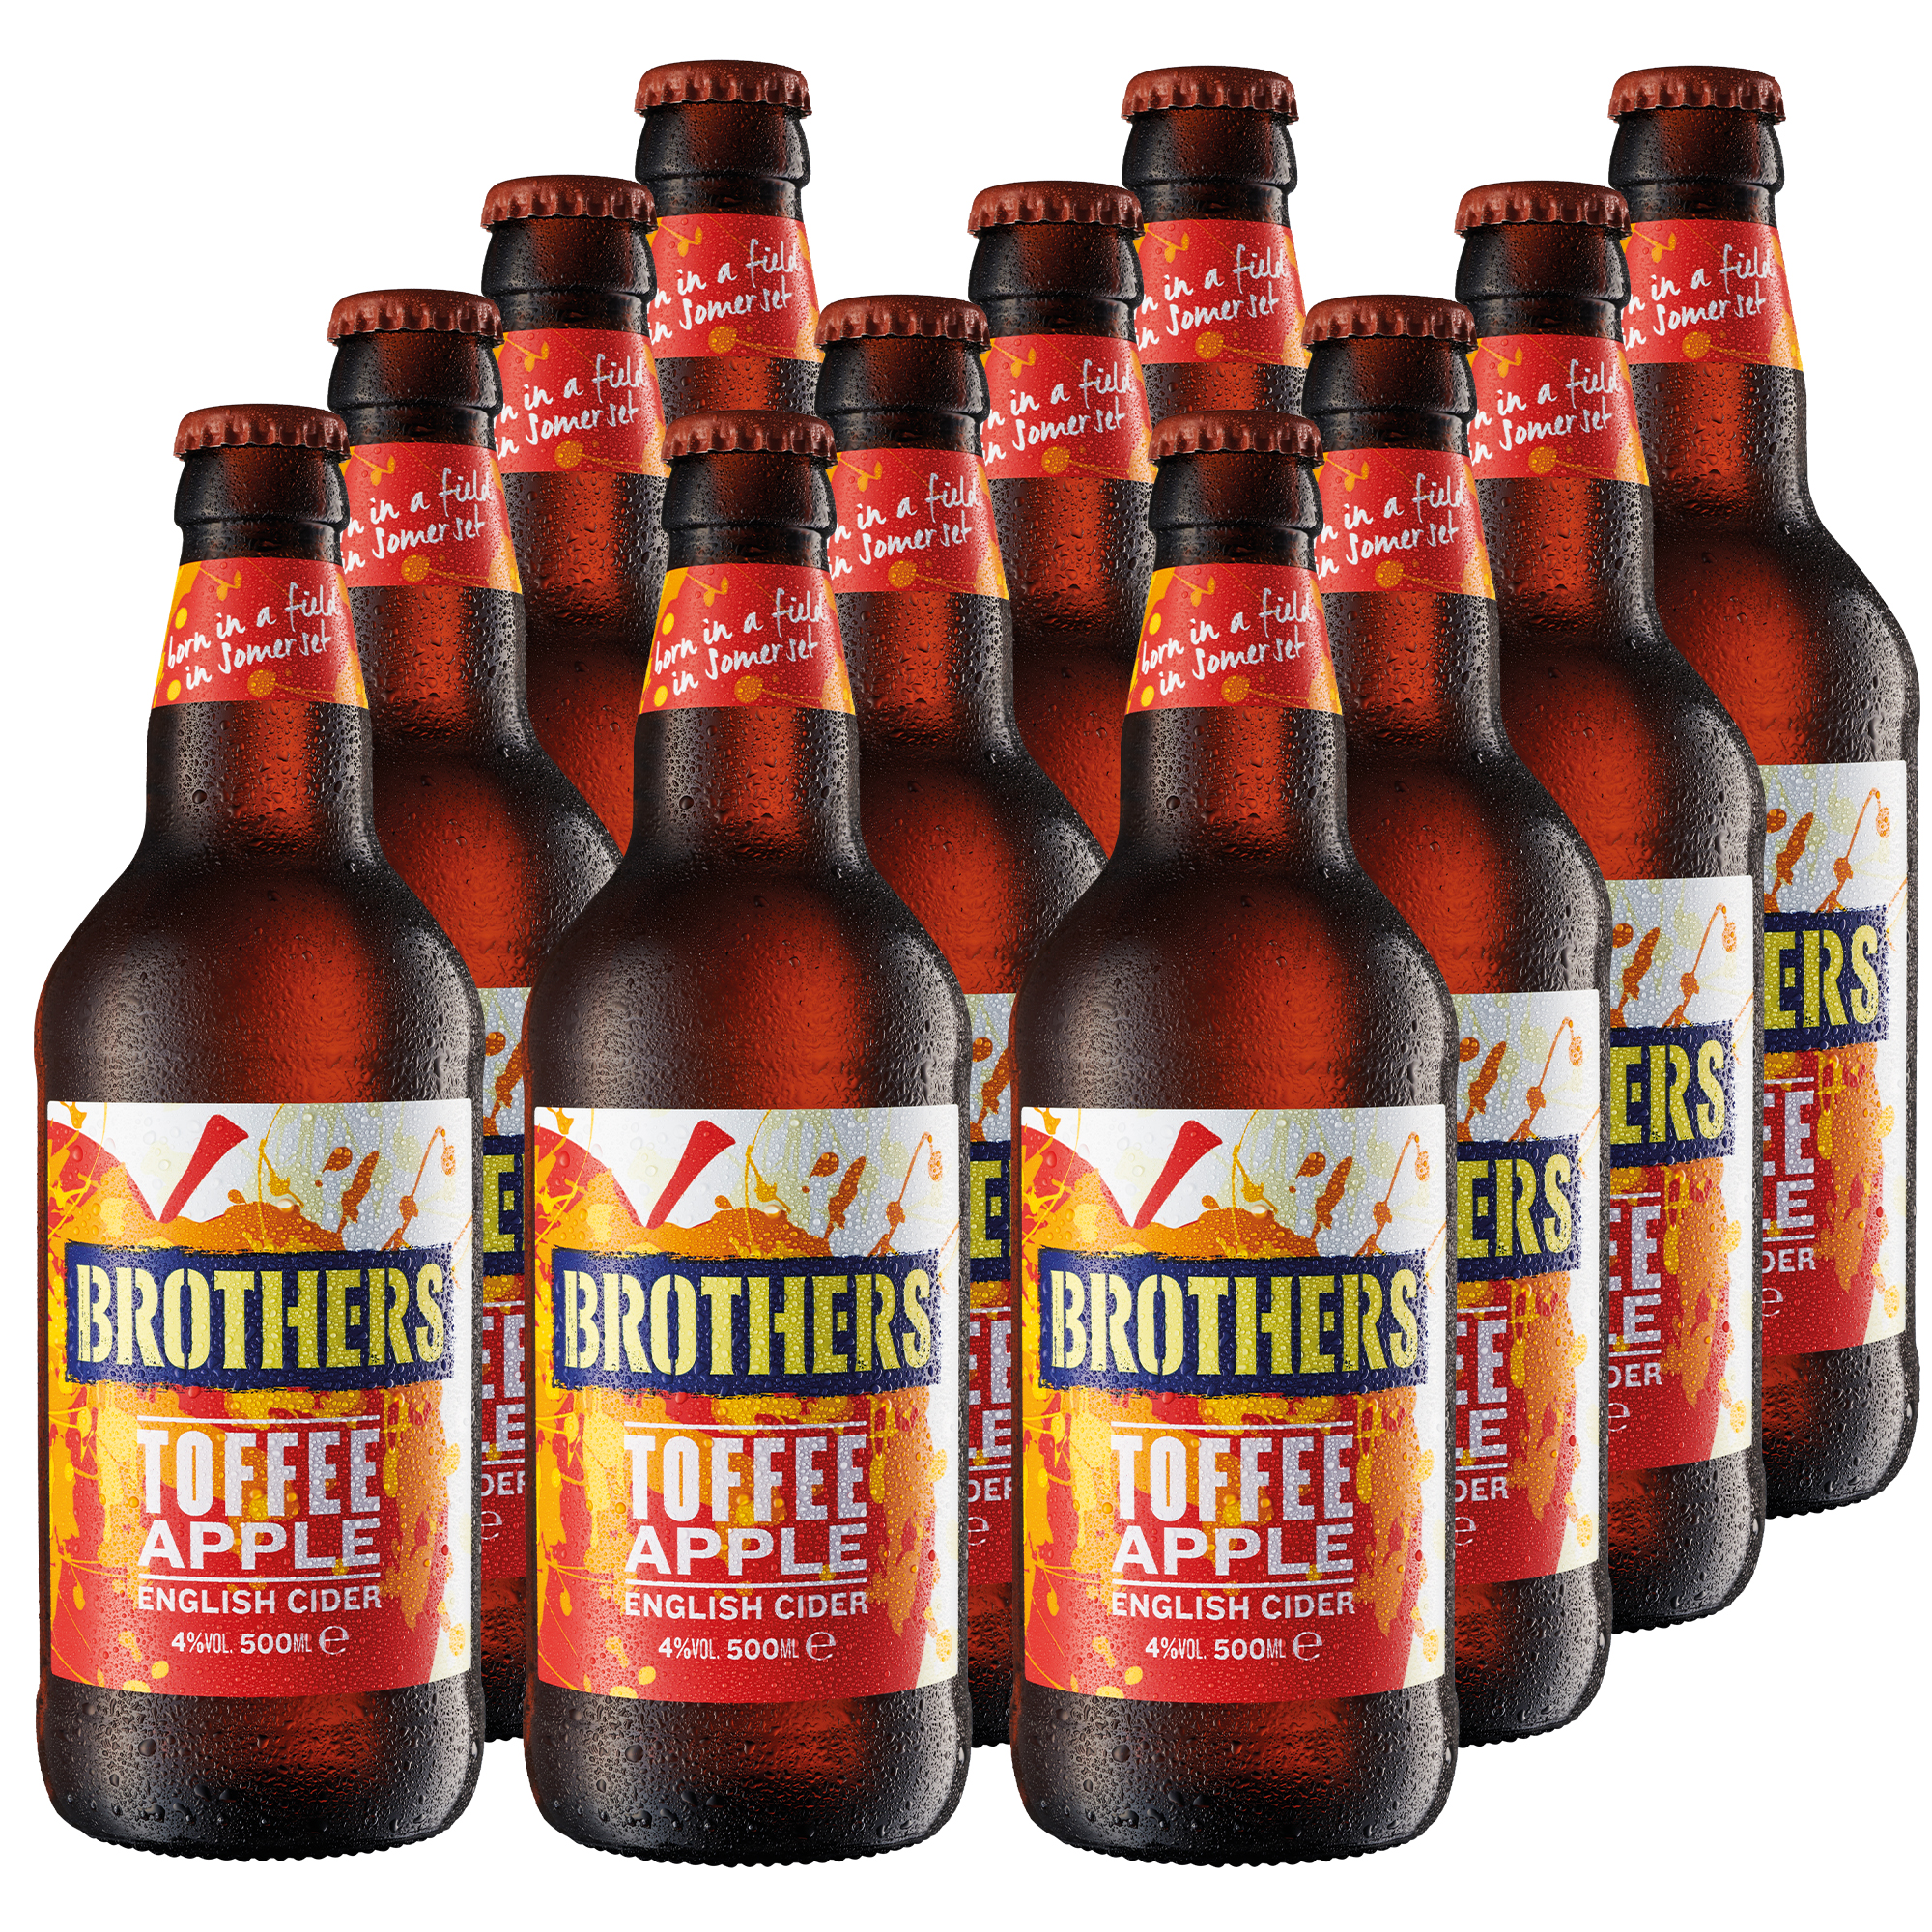 Brothers Toffee Apple Cider 12x500ml